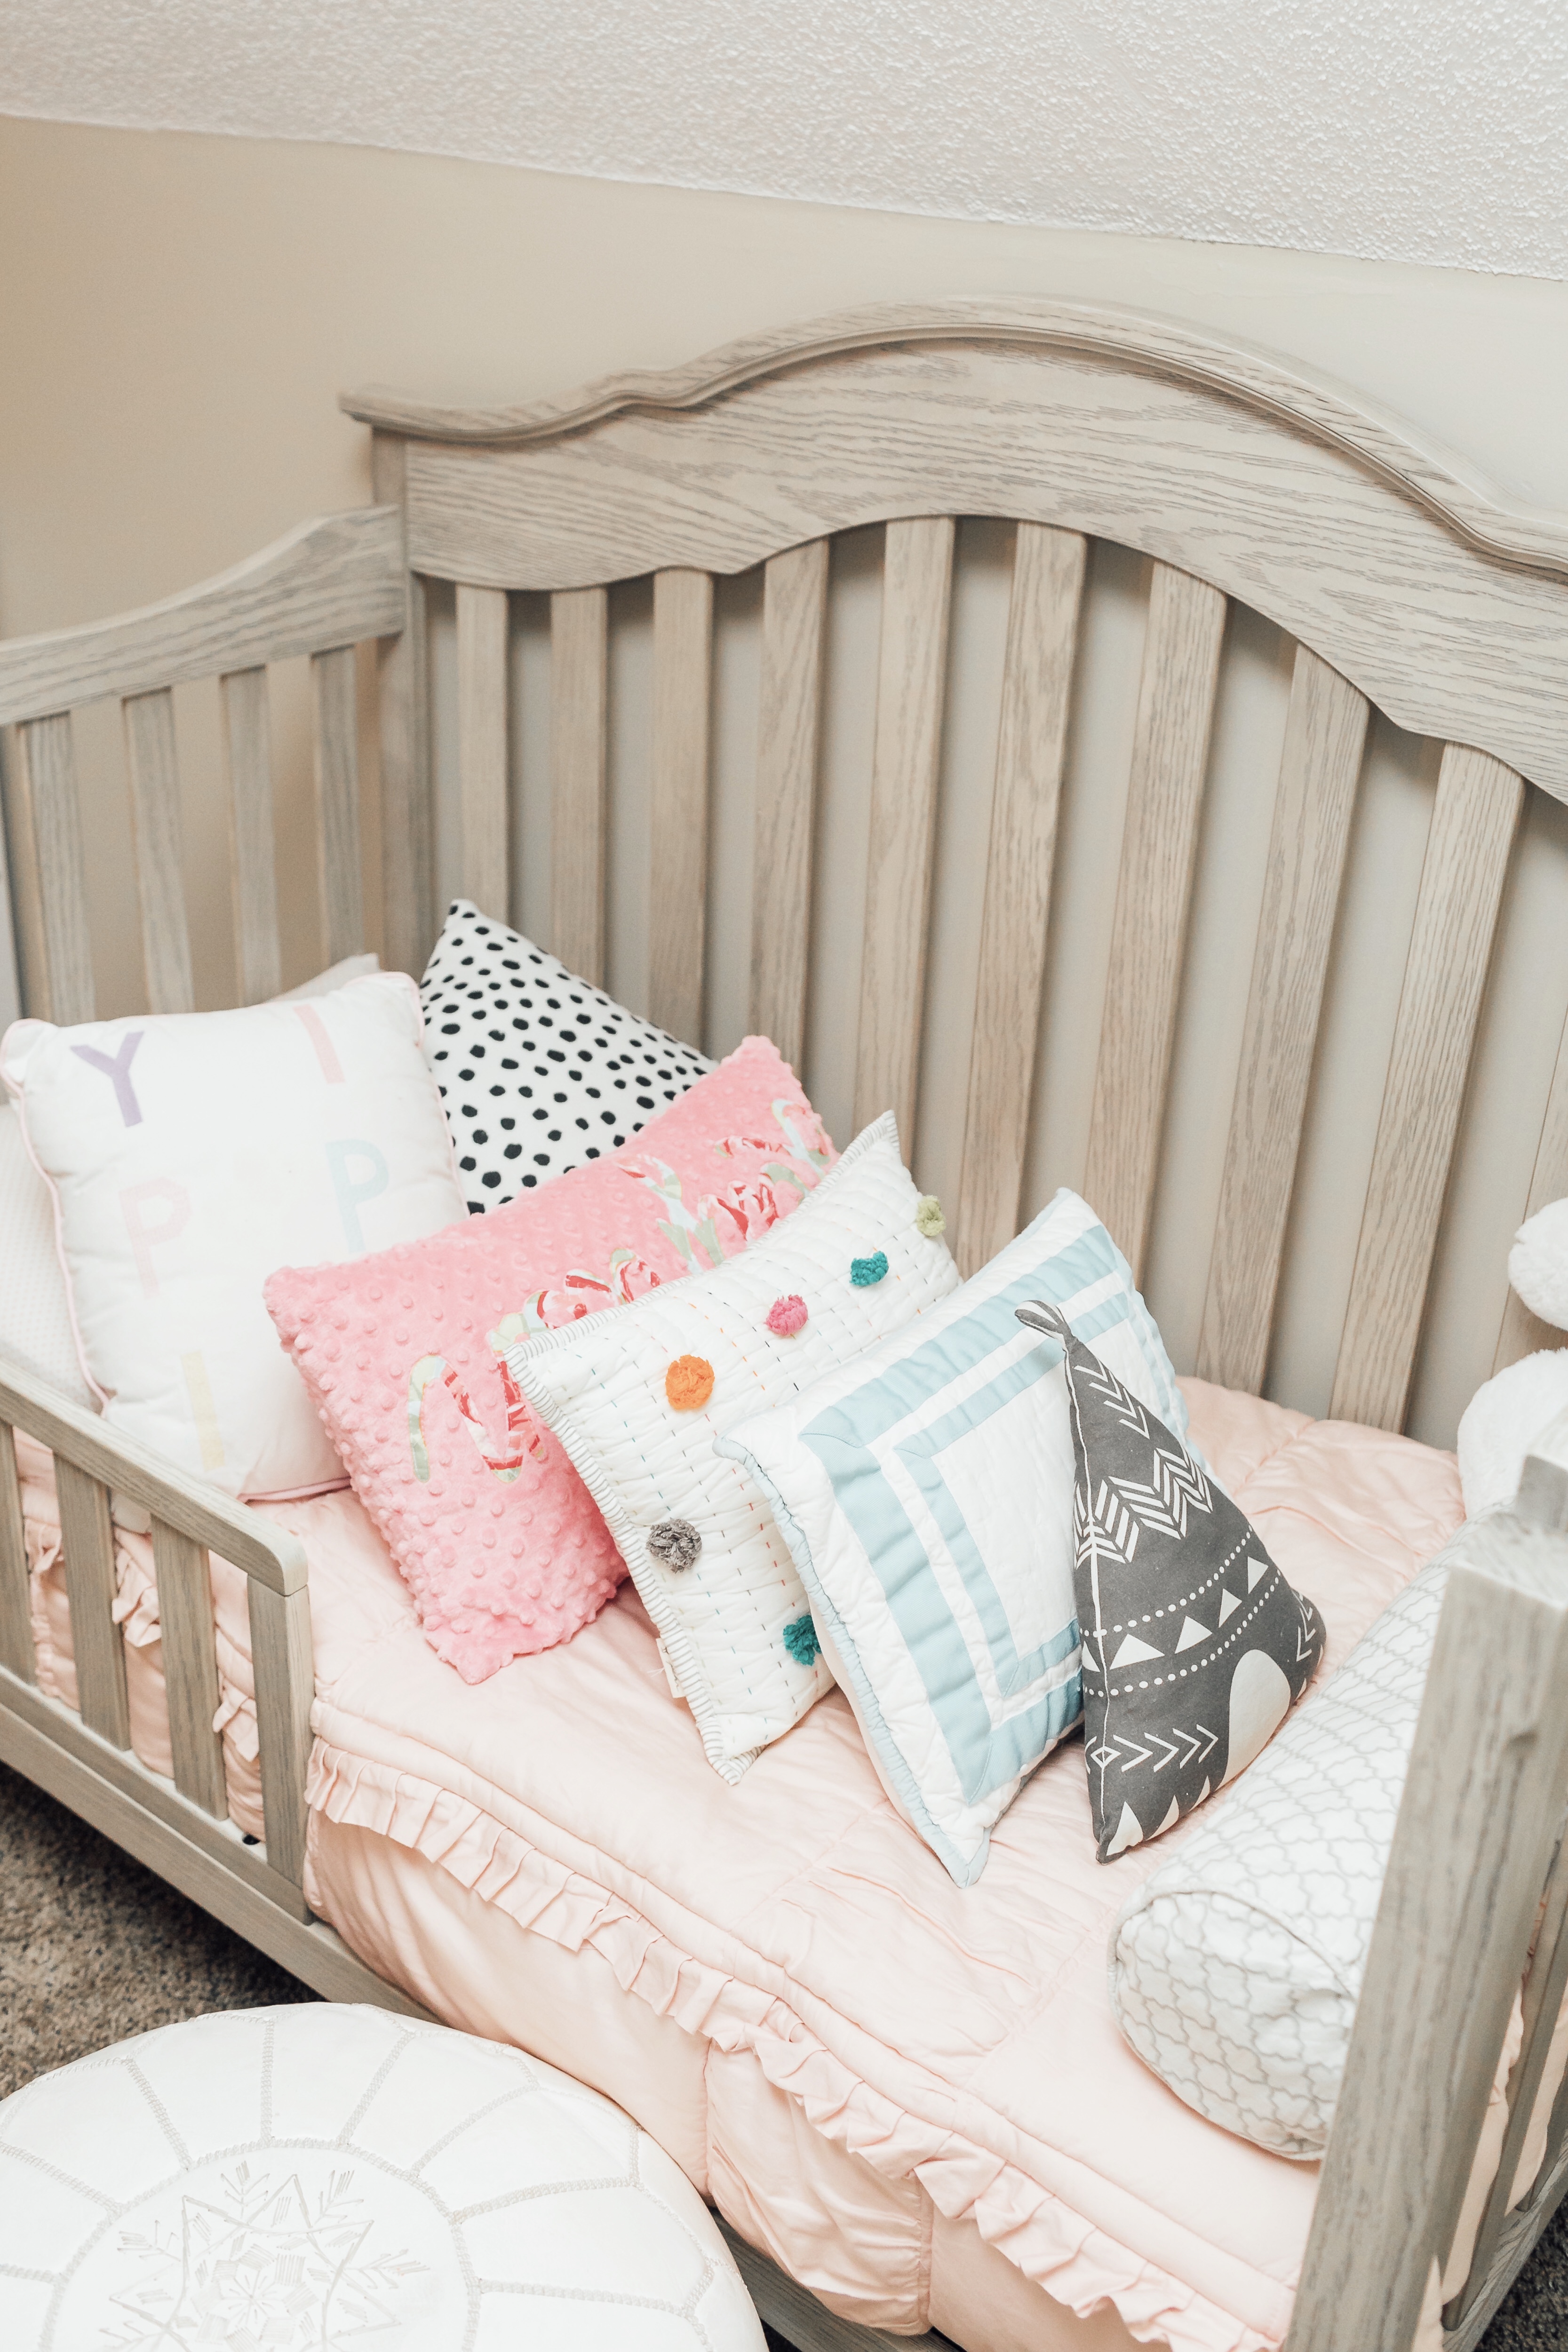 Toddler Bedroom Ideas from Delta Children furniture featured by top US life and style blog, Walking in Memphis in High Heels